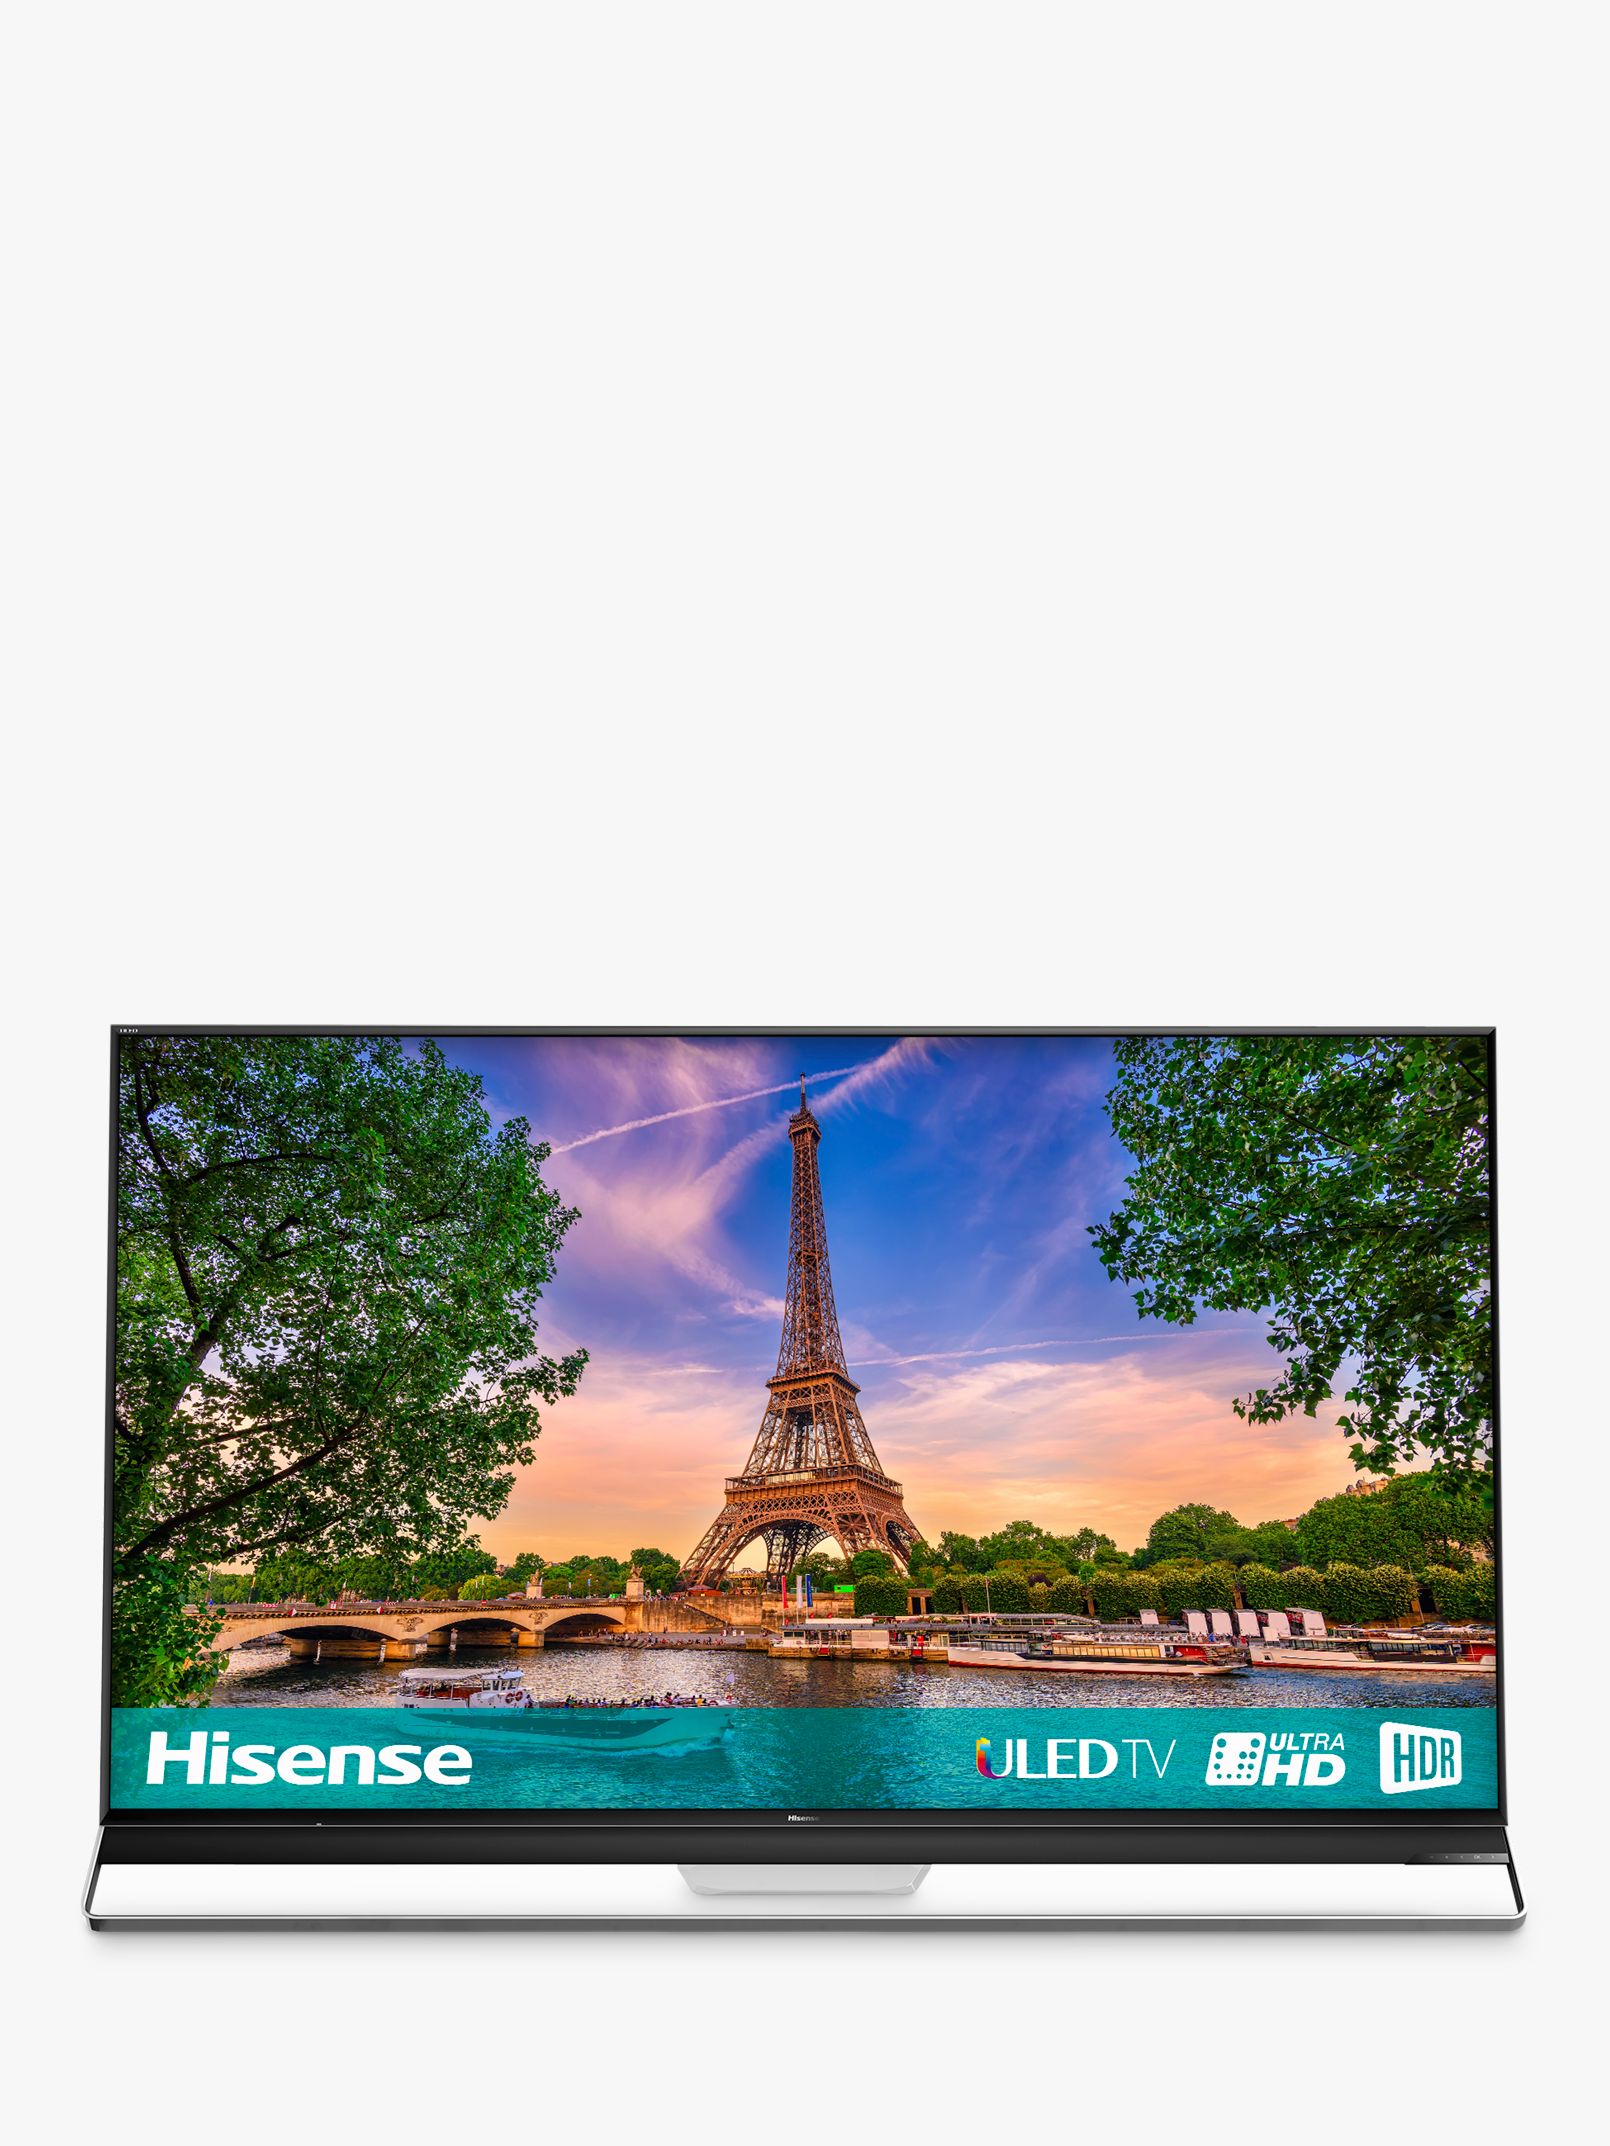 Hisense 75U9A ULED HDR 4K Ultra HD Smart TV, 75" with Freeview Play, Ultra HD Premium Certified, Black/Silver